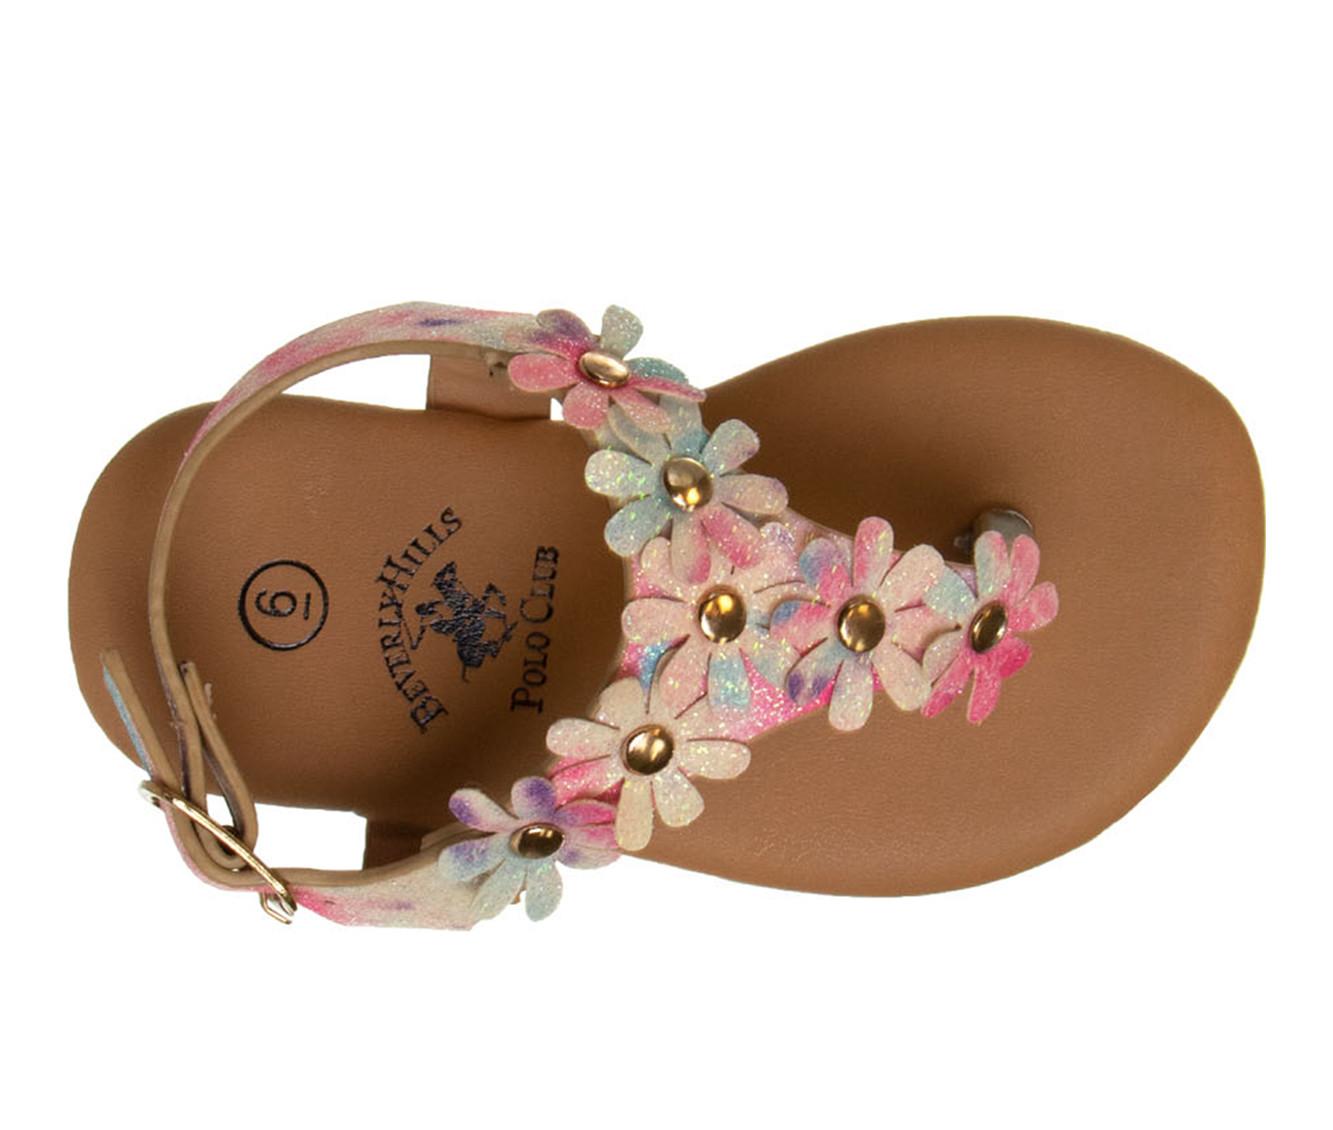 Girls' Beverly Hills Polo Club Toddler Youthful Crsr Sandals